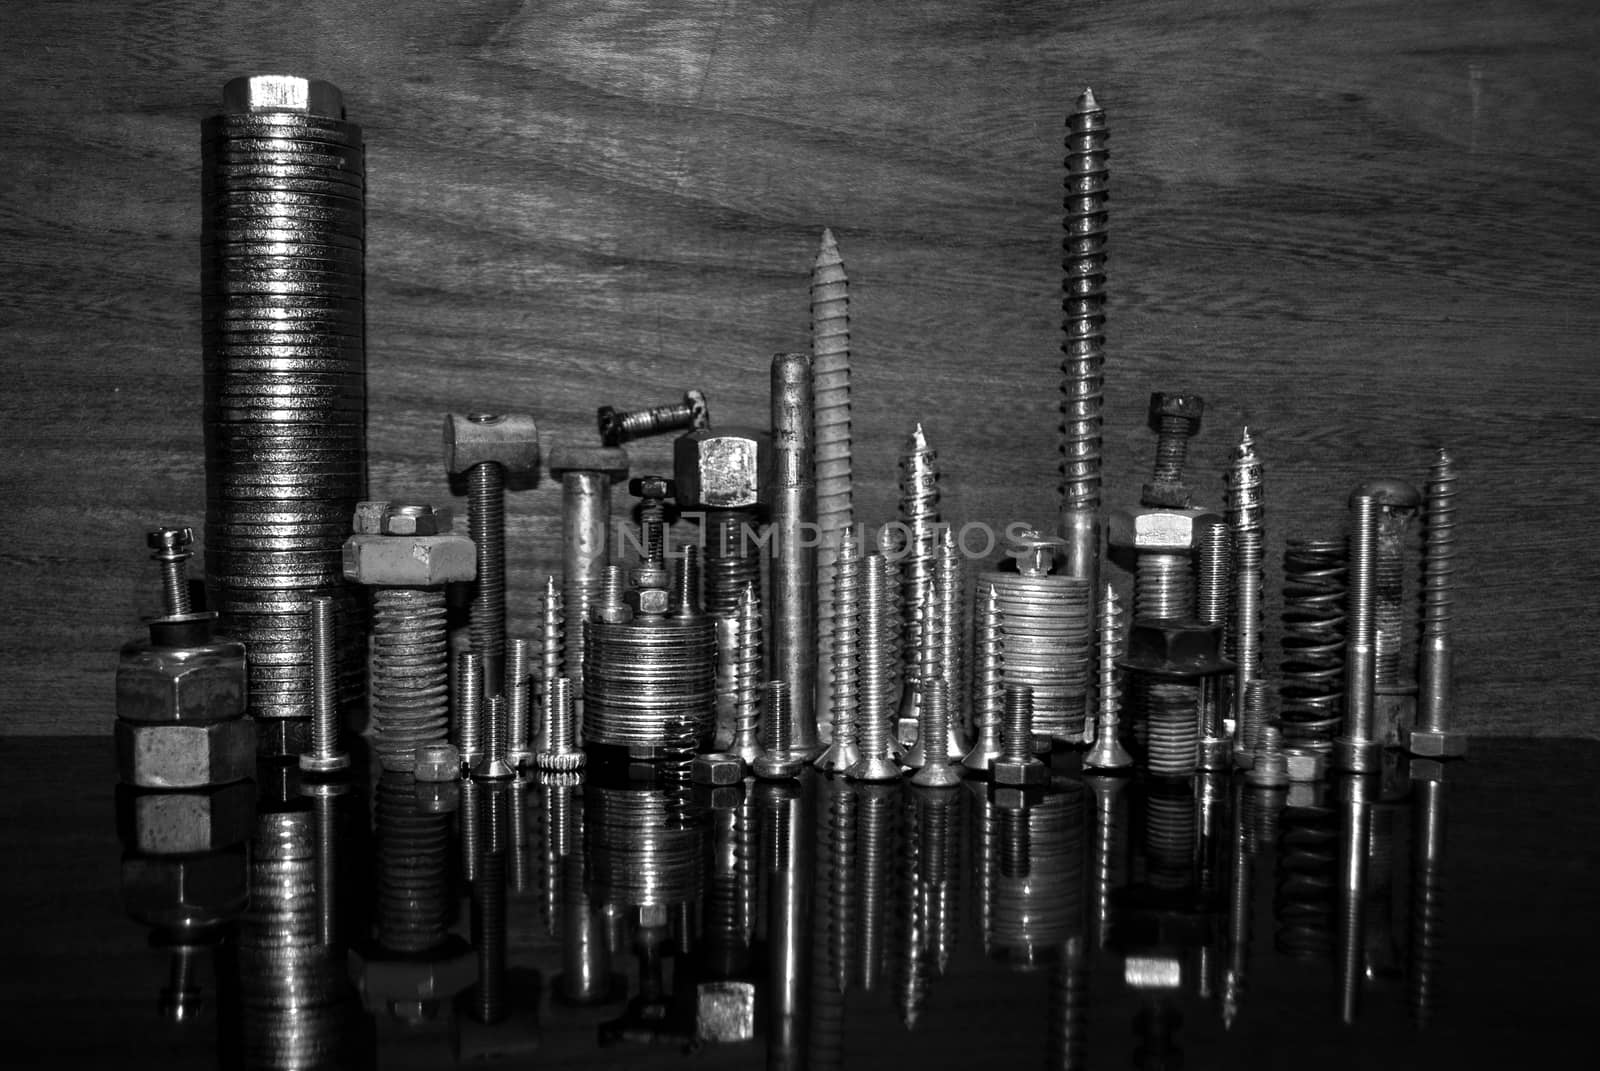 Screws and nuts forming a cityscape